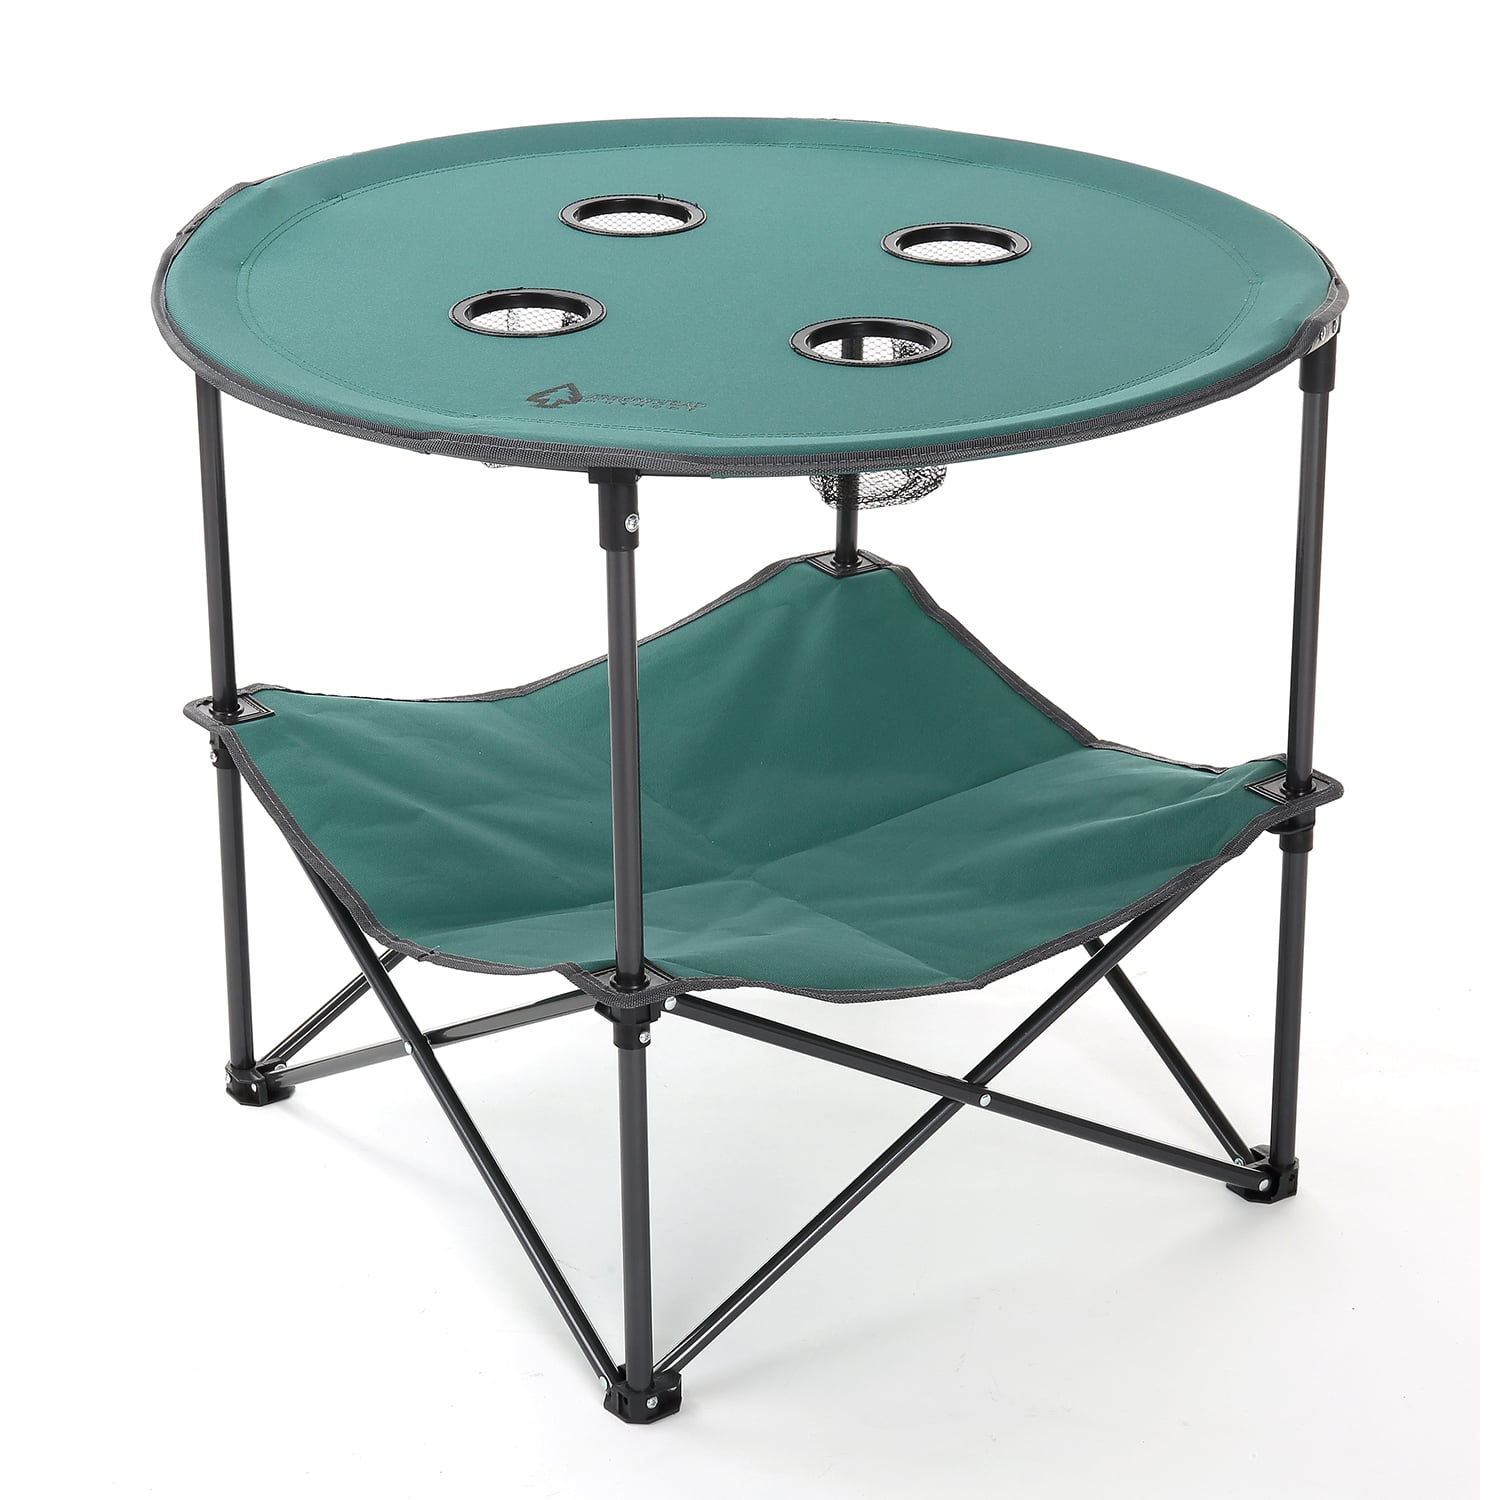 ARROWHEAD OUTDOOR Heavy-Duty Portable Folding Table, 4 Cup Holders, No Sag  Surface, Compact, Round, Carrying Case, Steel Frame, High-Grade 600D 